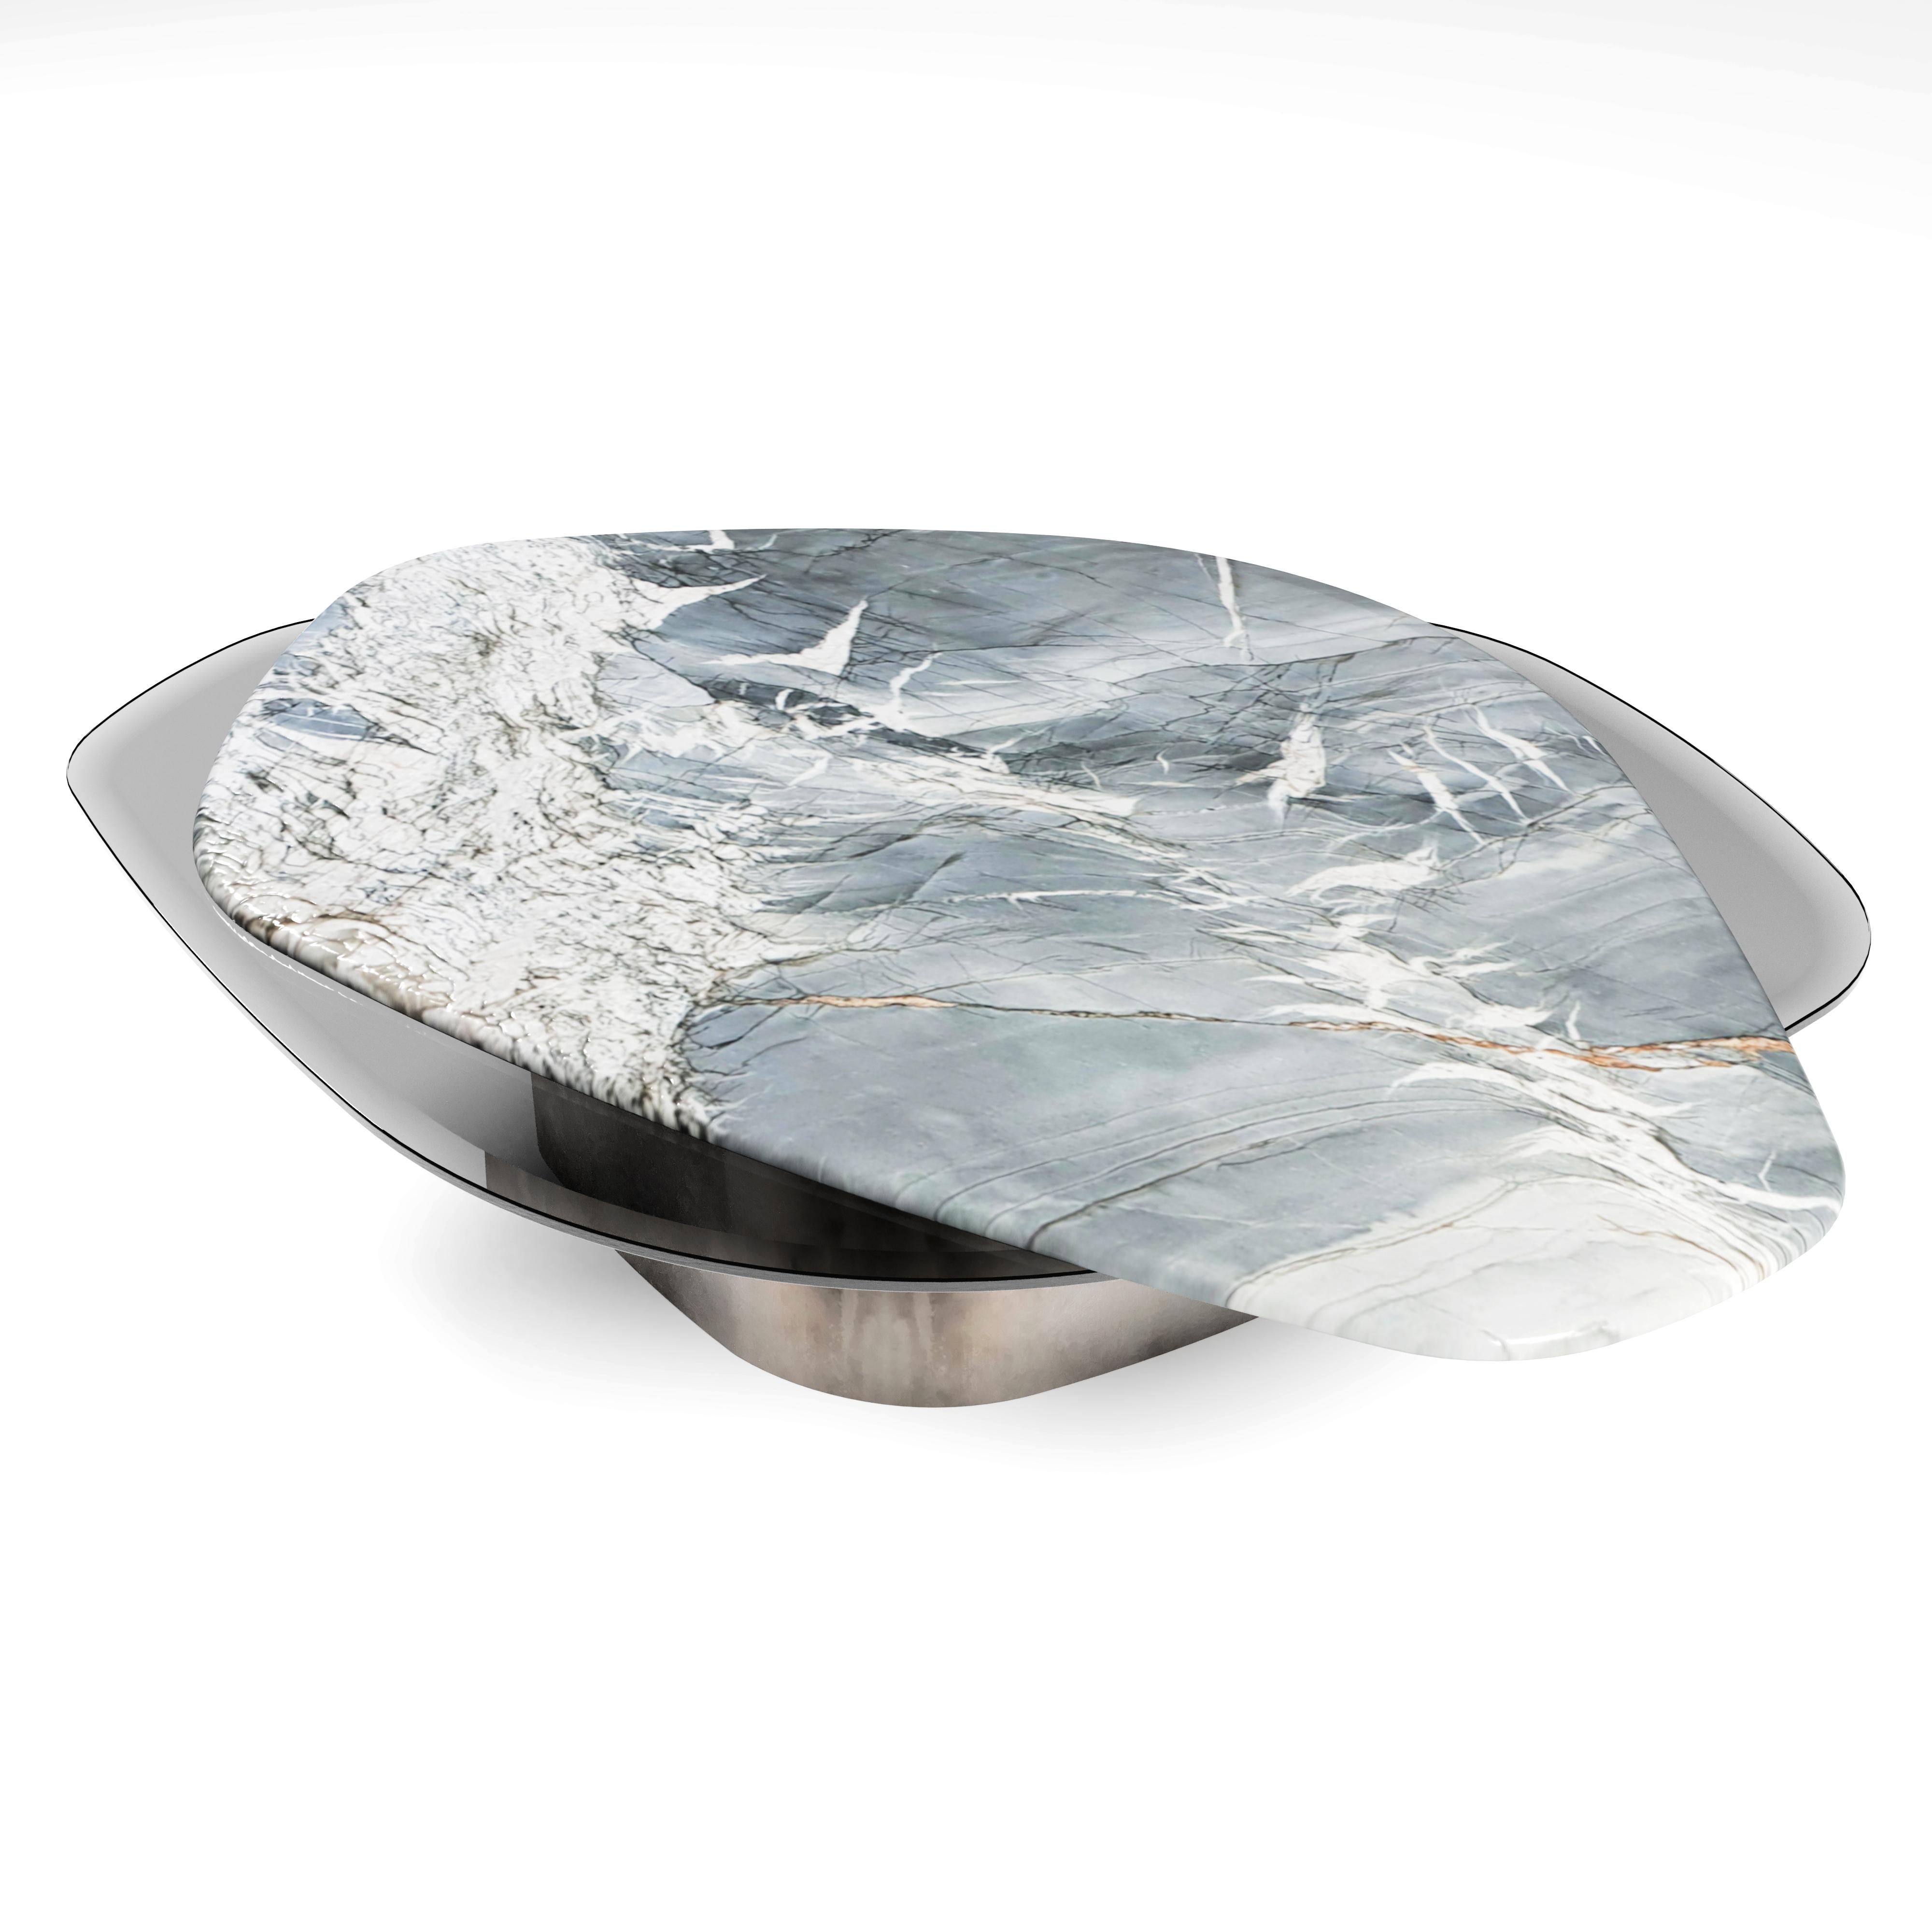 “The Elements VI Contemporary Center Coffee Table ft. Venom quartzite and tempered smoked glass tops with row stainless steel base.

Created of the two totally different shapes, structures reveals some symbiotic influence between each other. One